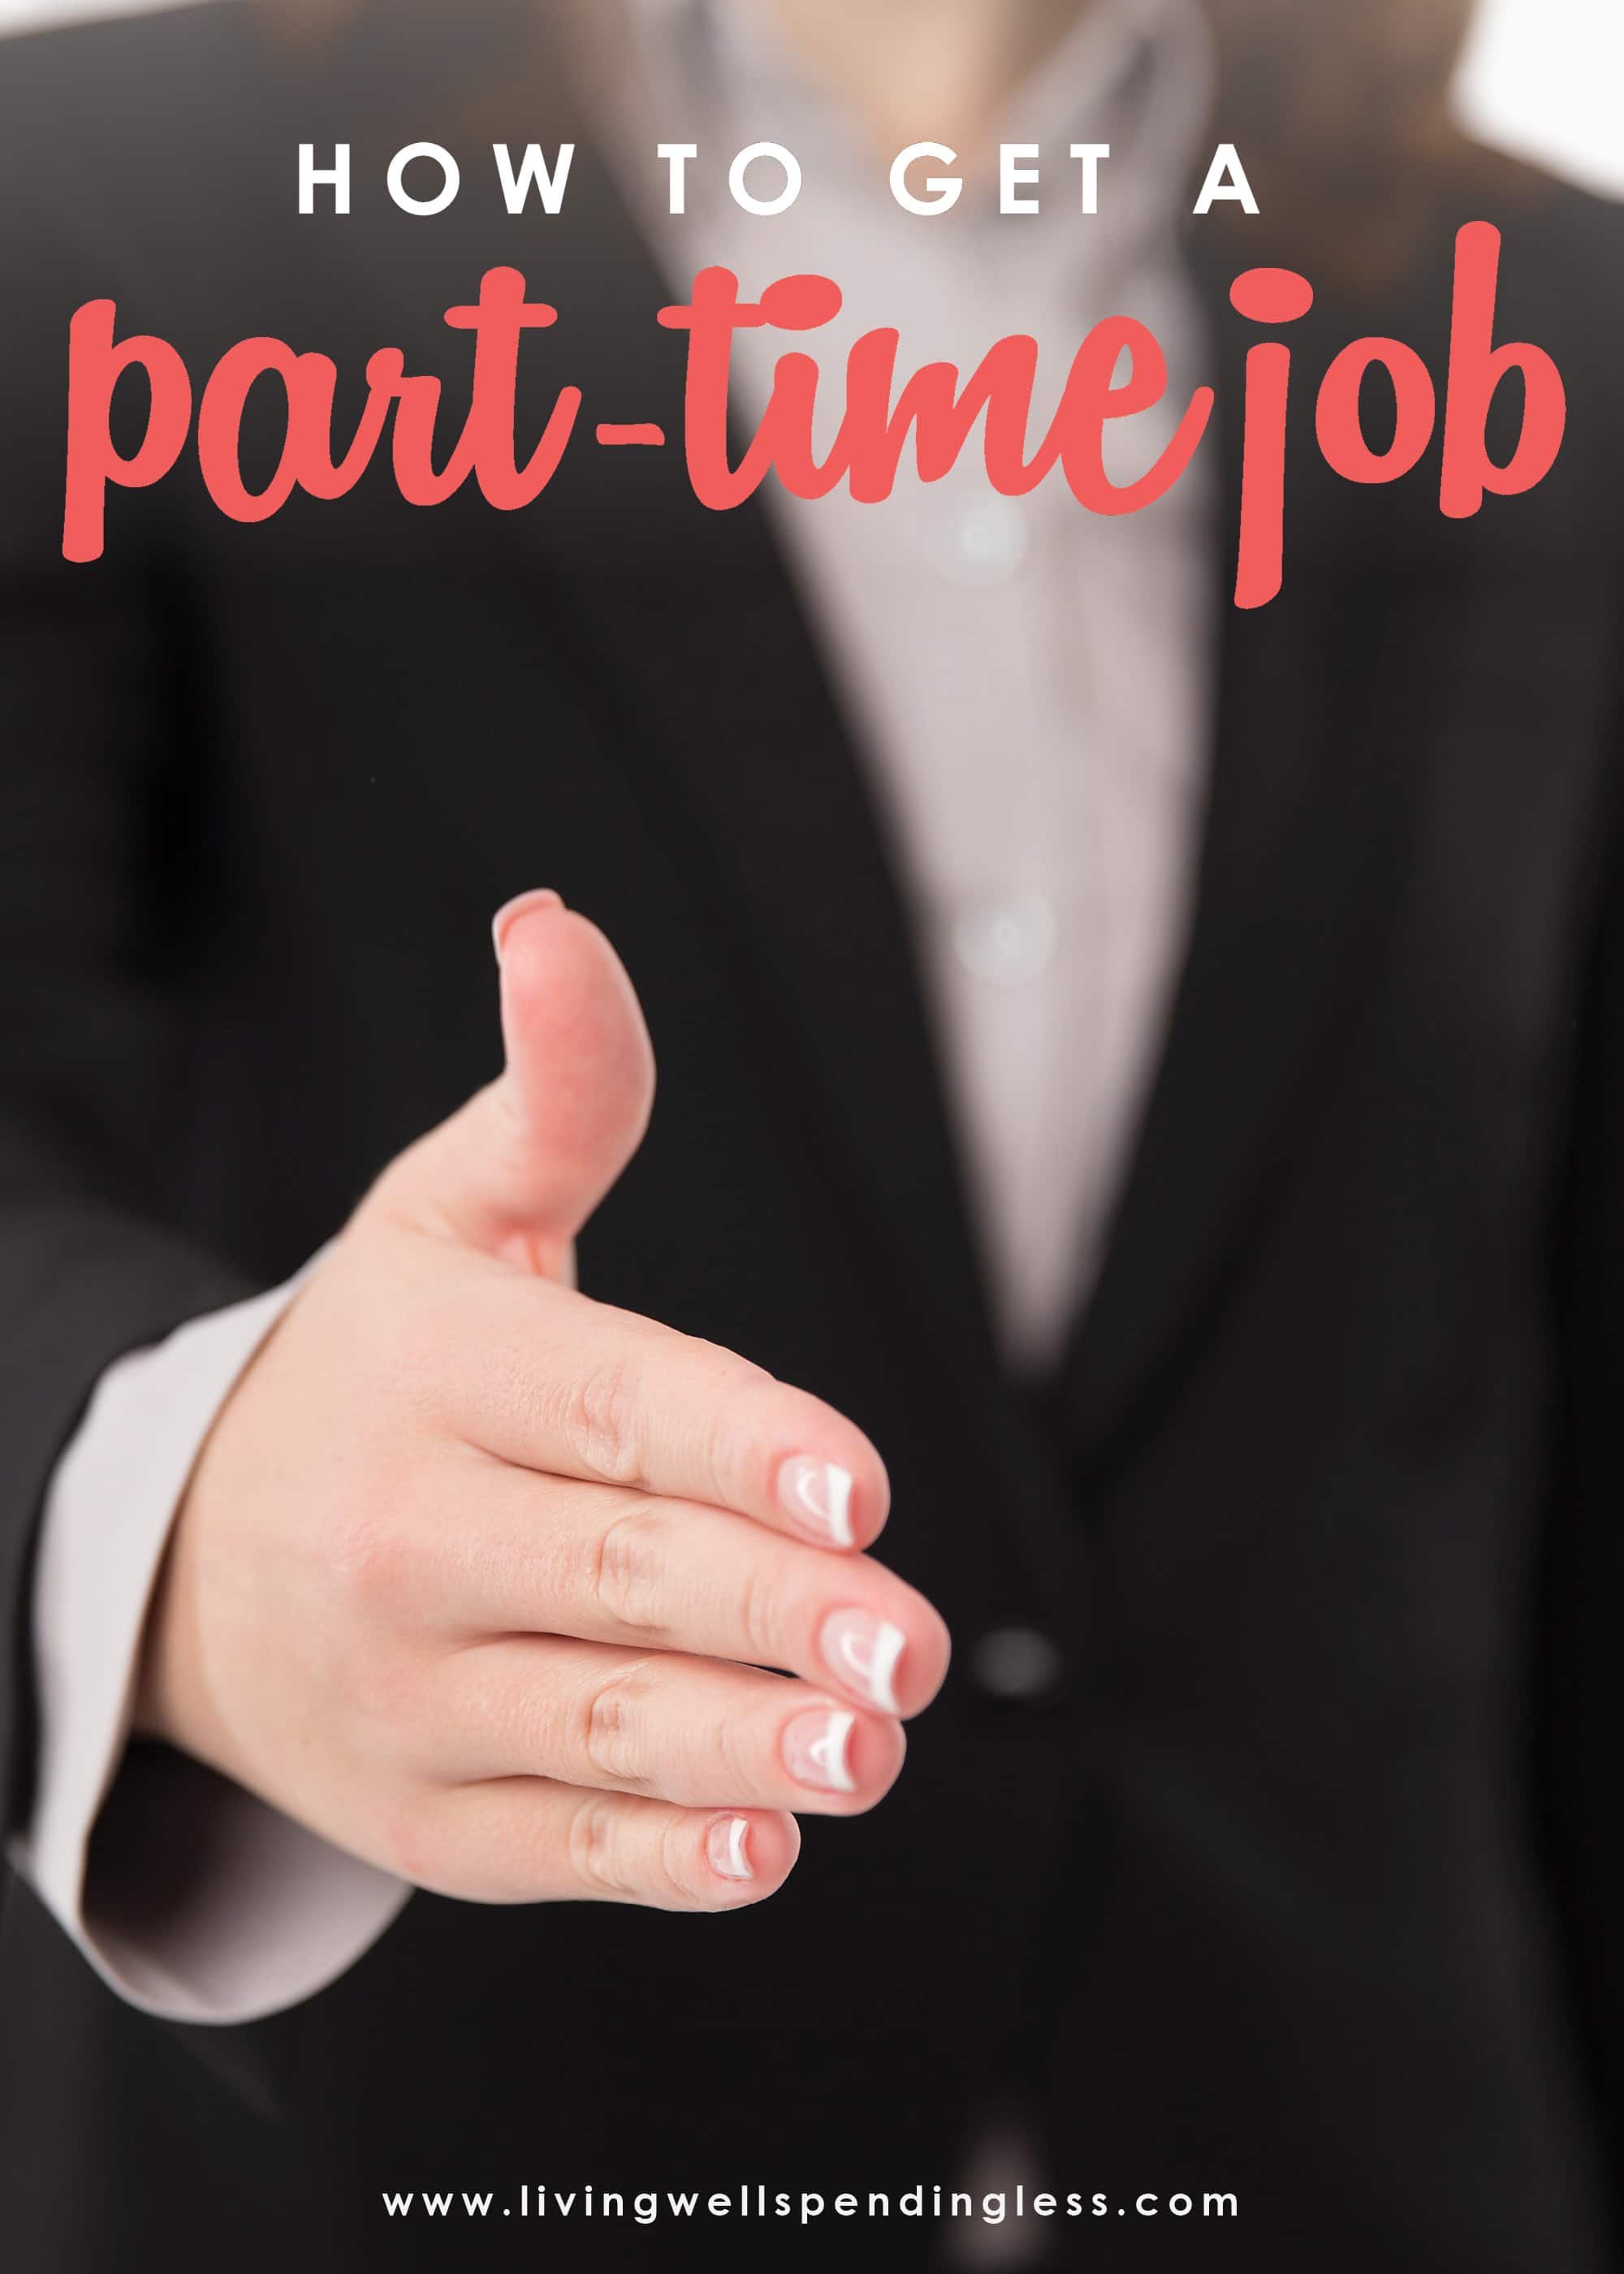 Looking to land your first part-time job? Don't miss these super practical tips for how to wow your potential employer, nail your interview, and finally hear those magic words you've been waiting for--you're hired!